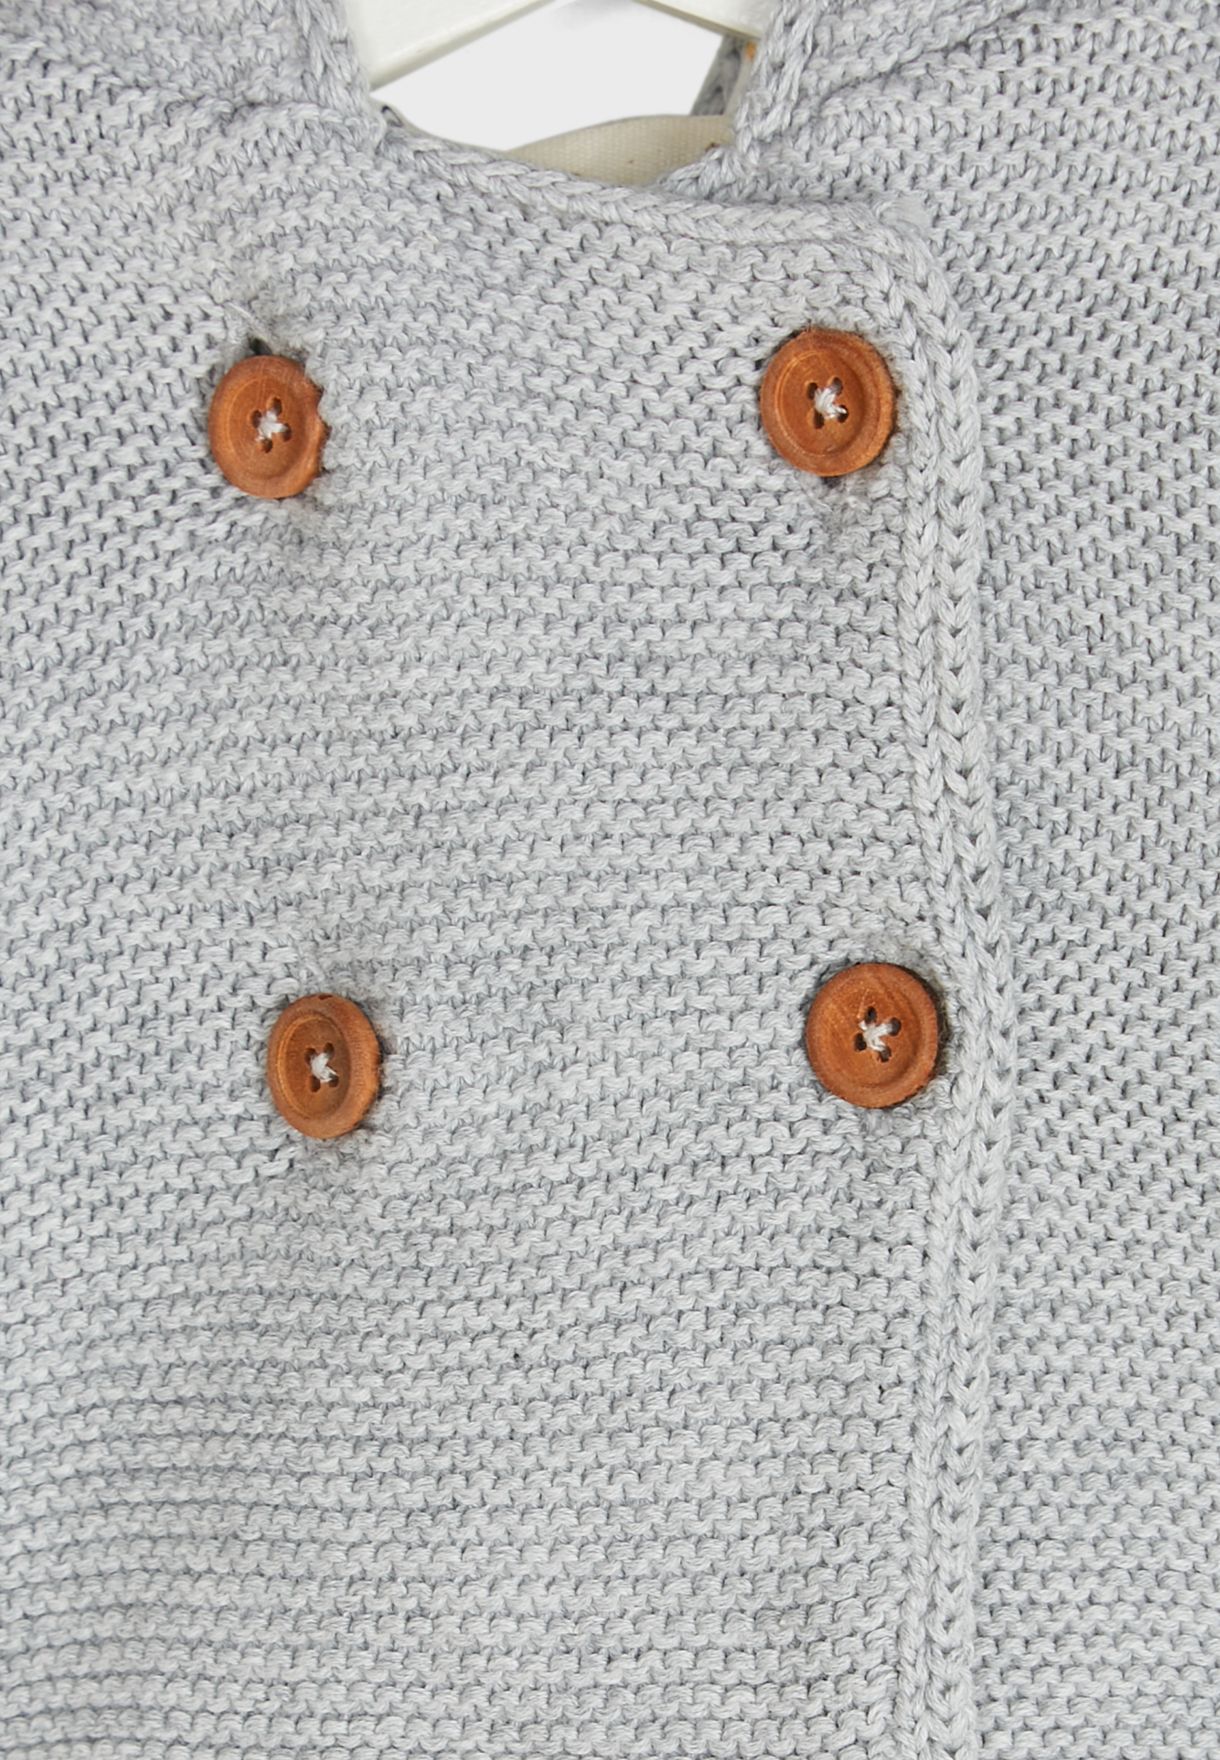 Infant Knitted Hooded Jacket